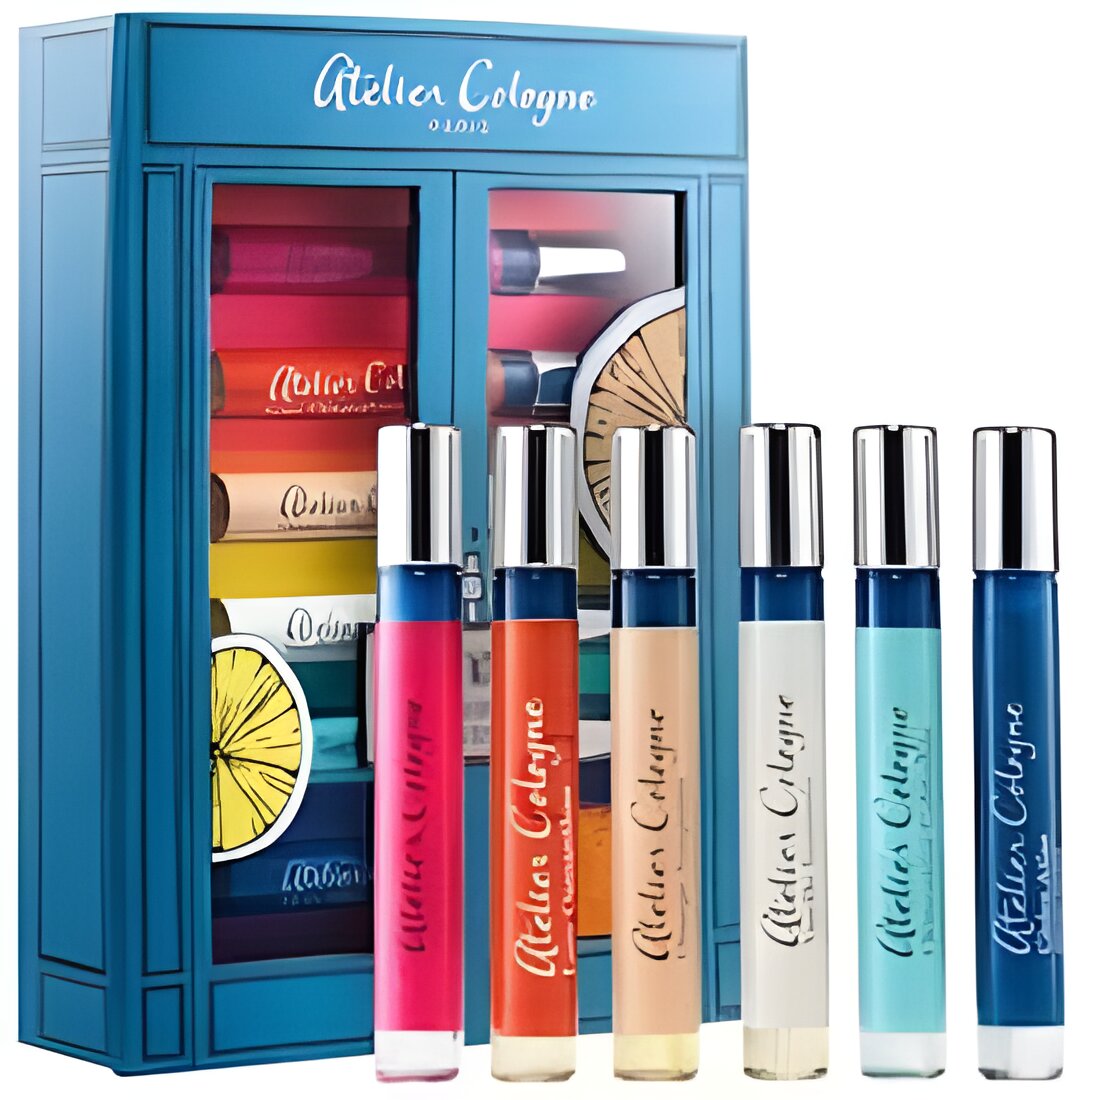 Free Atelier Cologne Sample